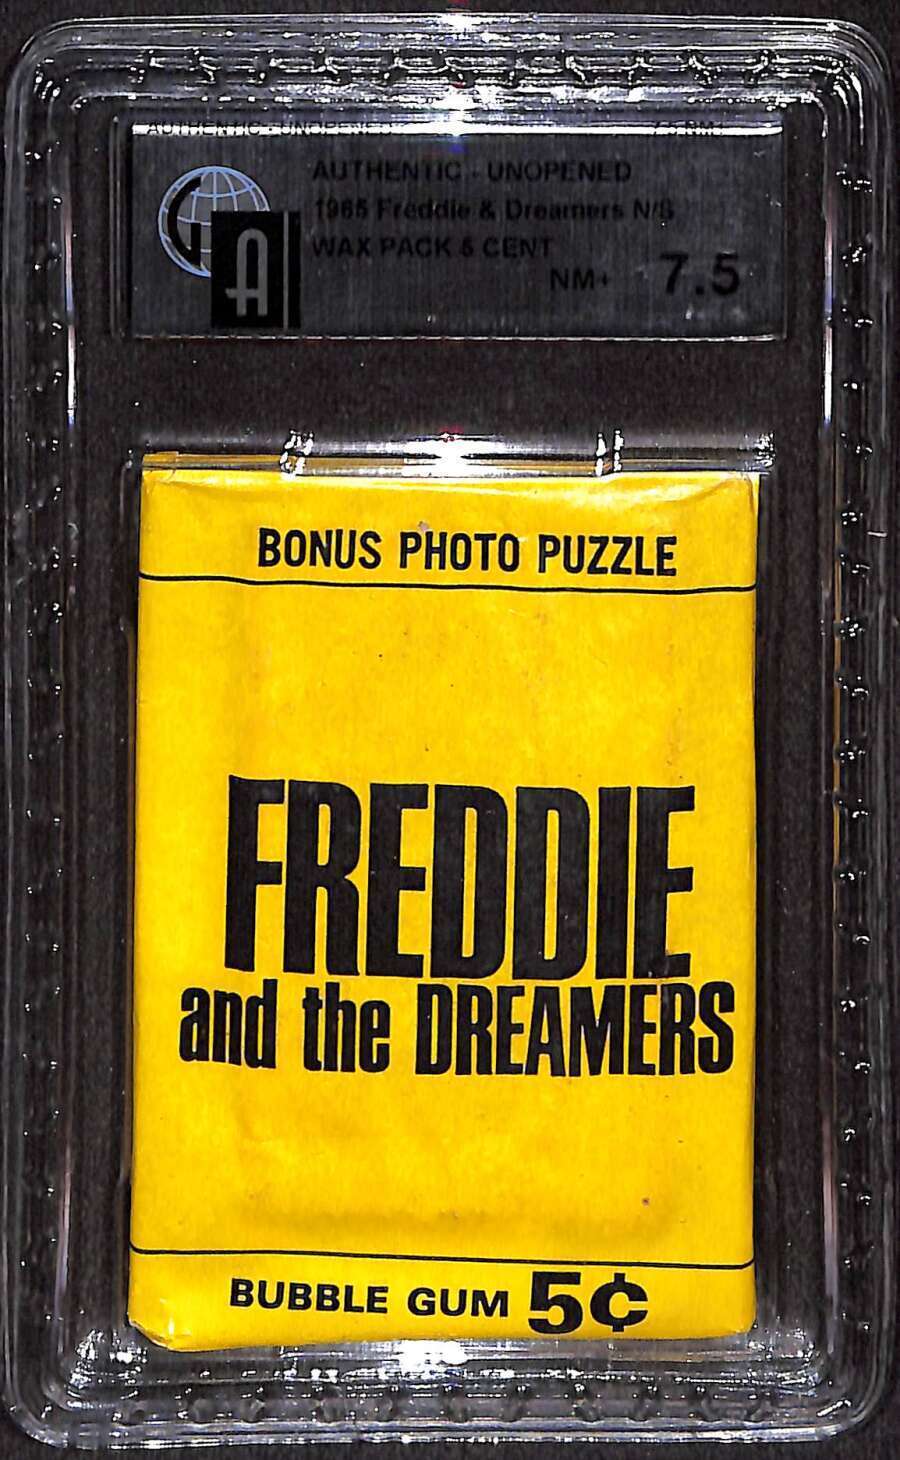 1965 Donruss Freddie and the Dreamers GAI 7.5 NM+ sealed 5 cent wax pack C88122